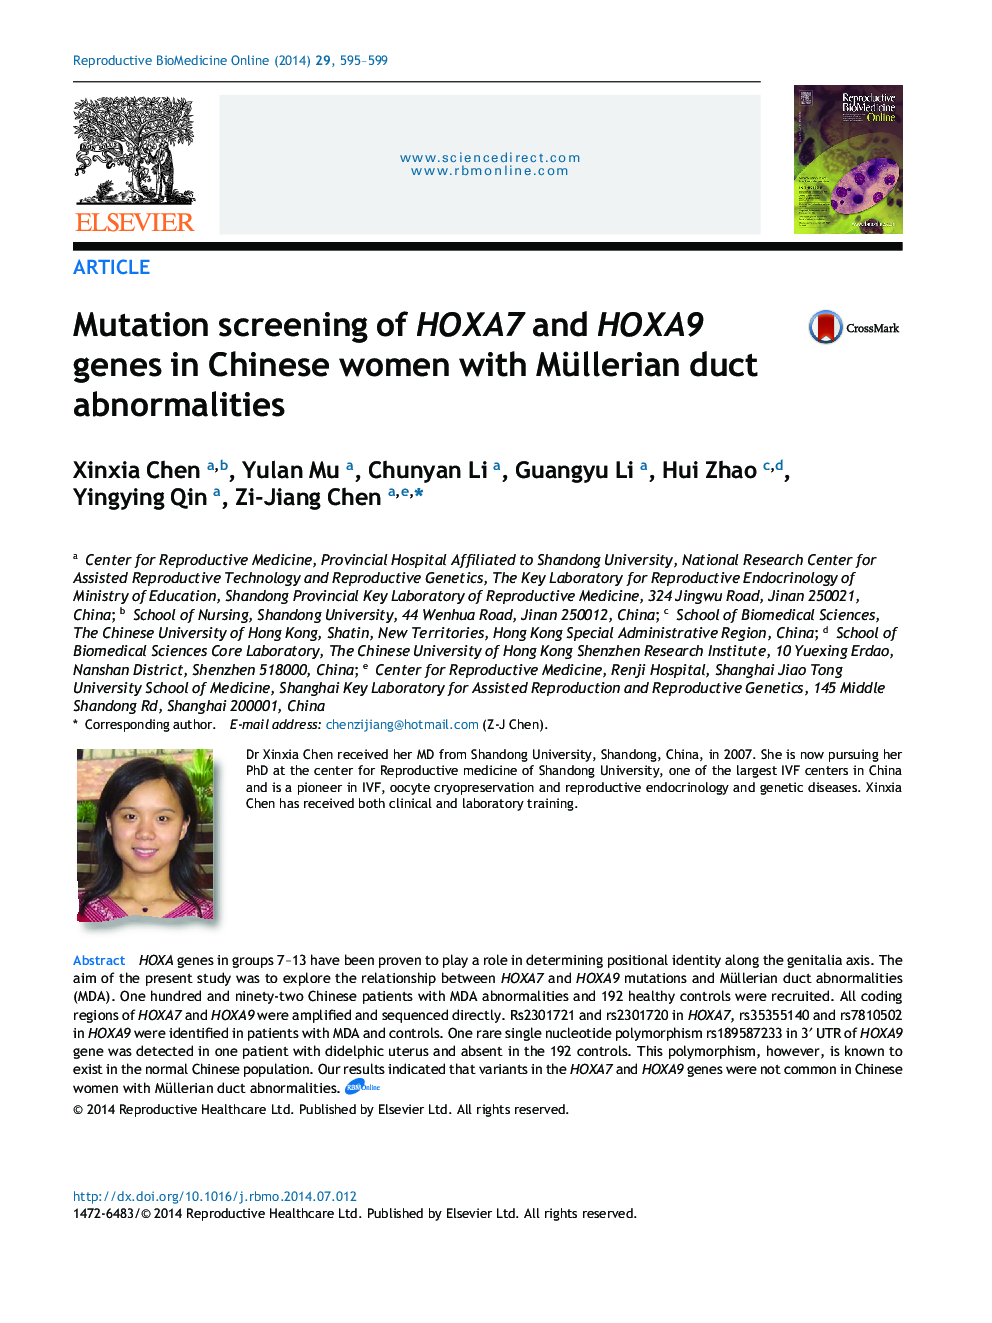 Mutation screening of HOXA7 and HOXA9 genes in Chinese women with Müllerian duct abnormalities